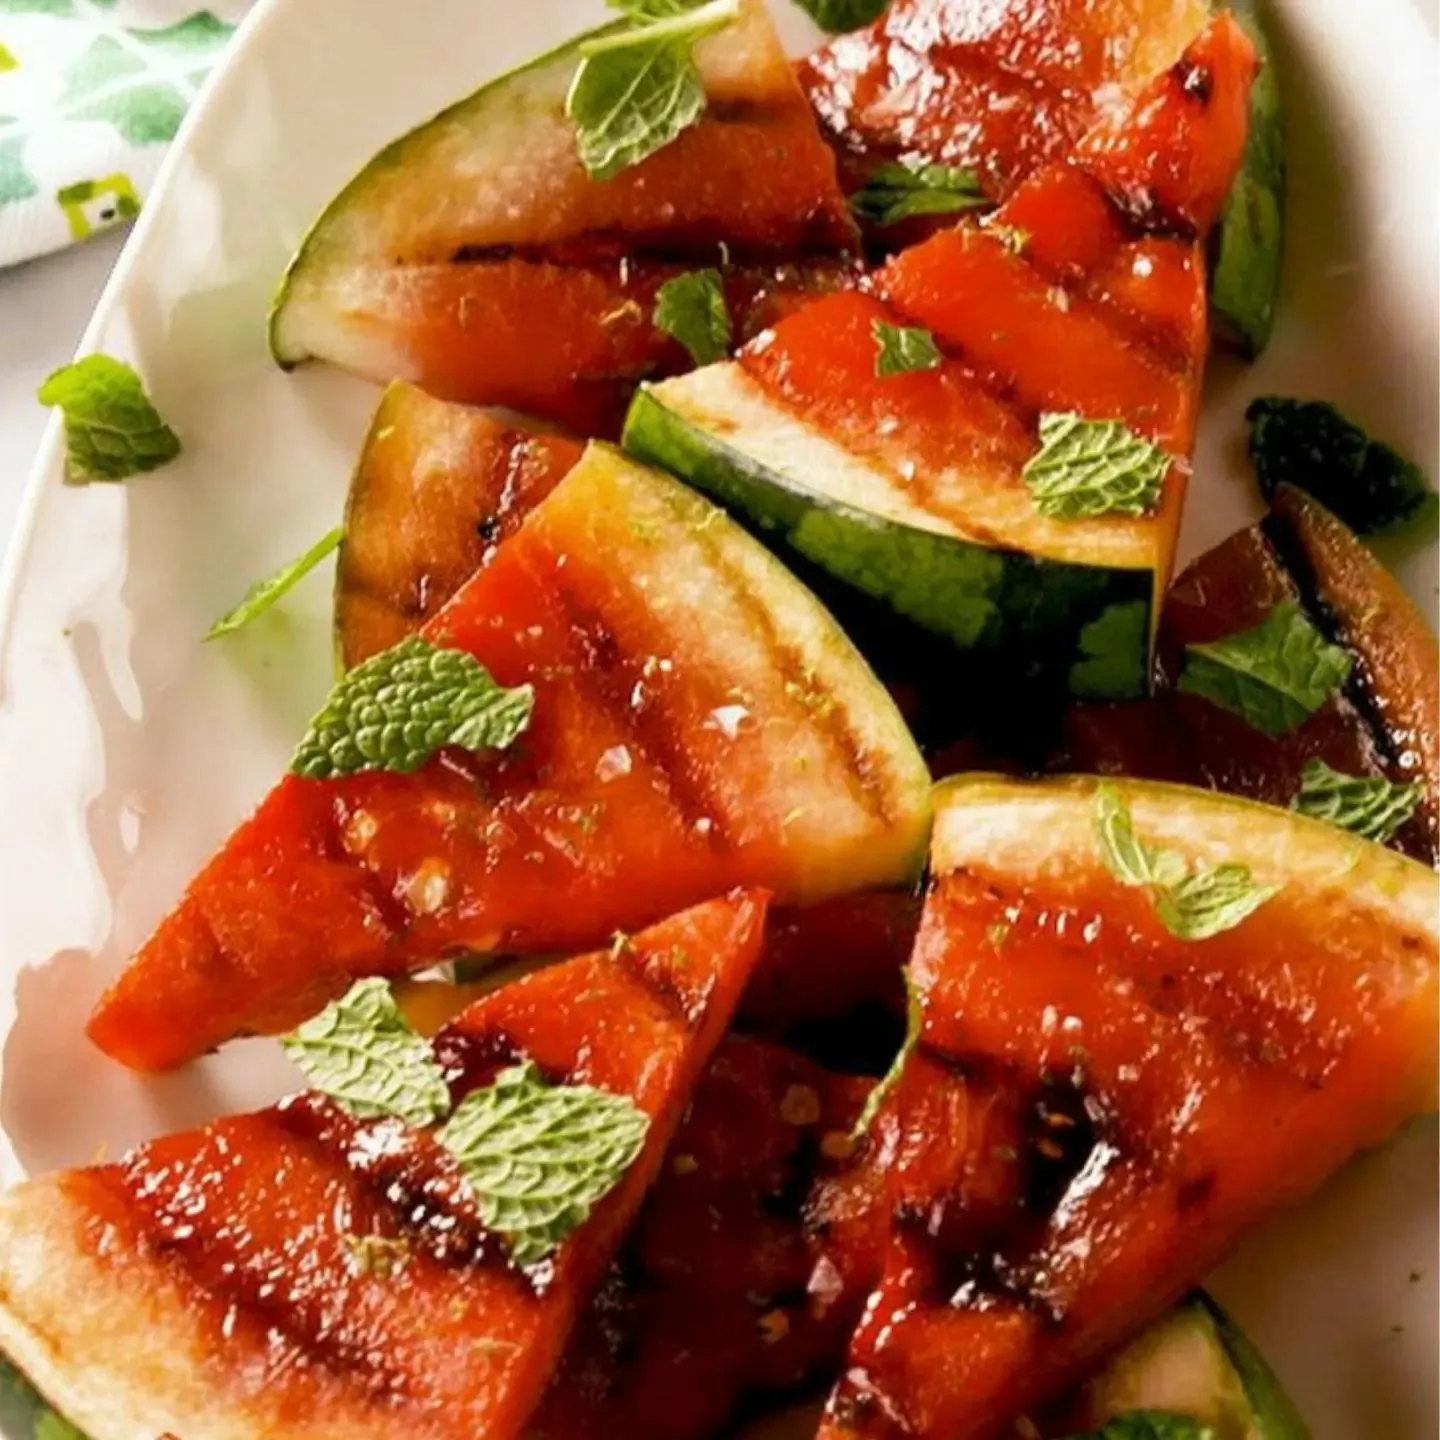 These smoky-flavoured grilled fruit delights